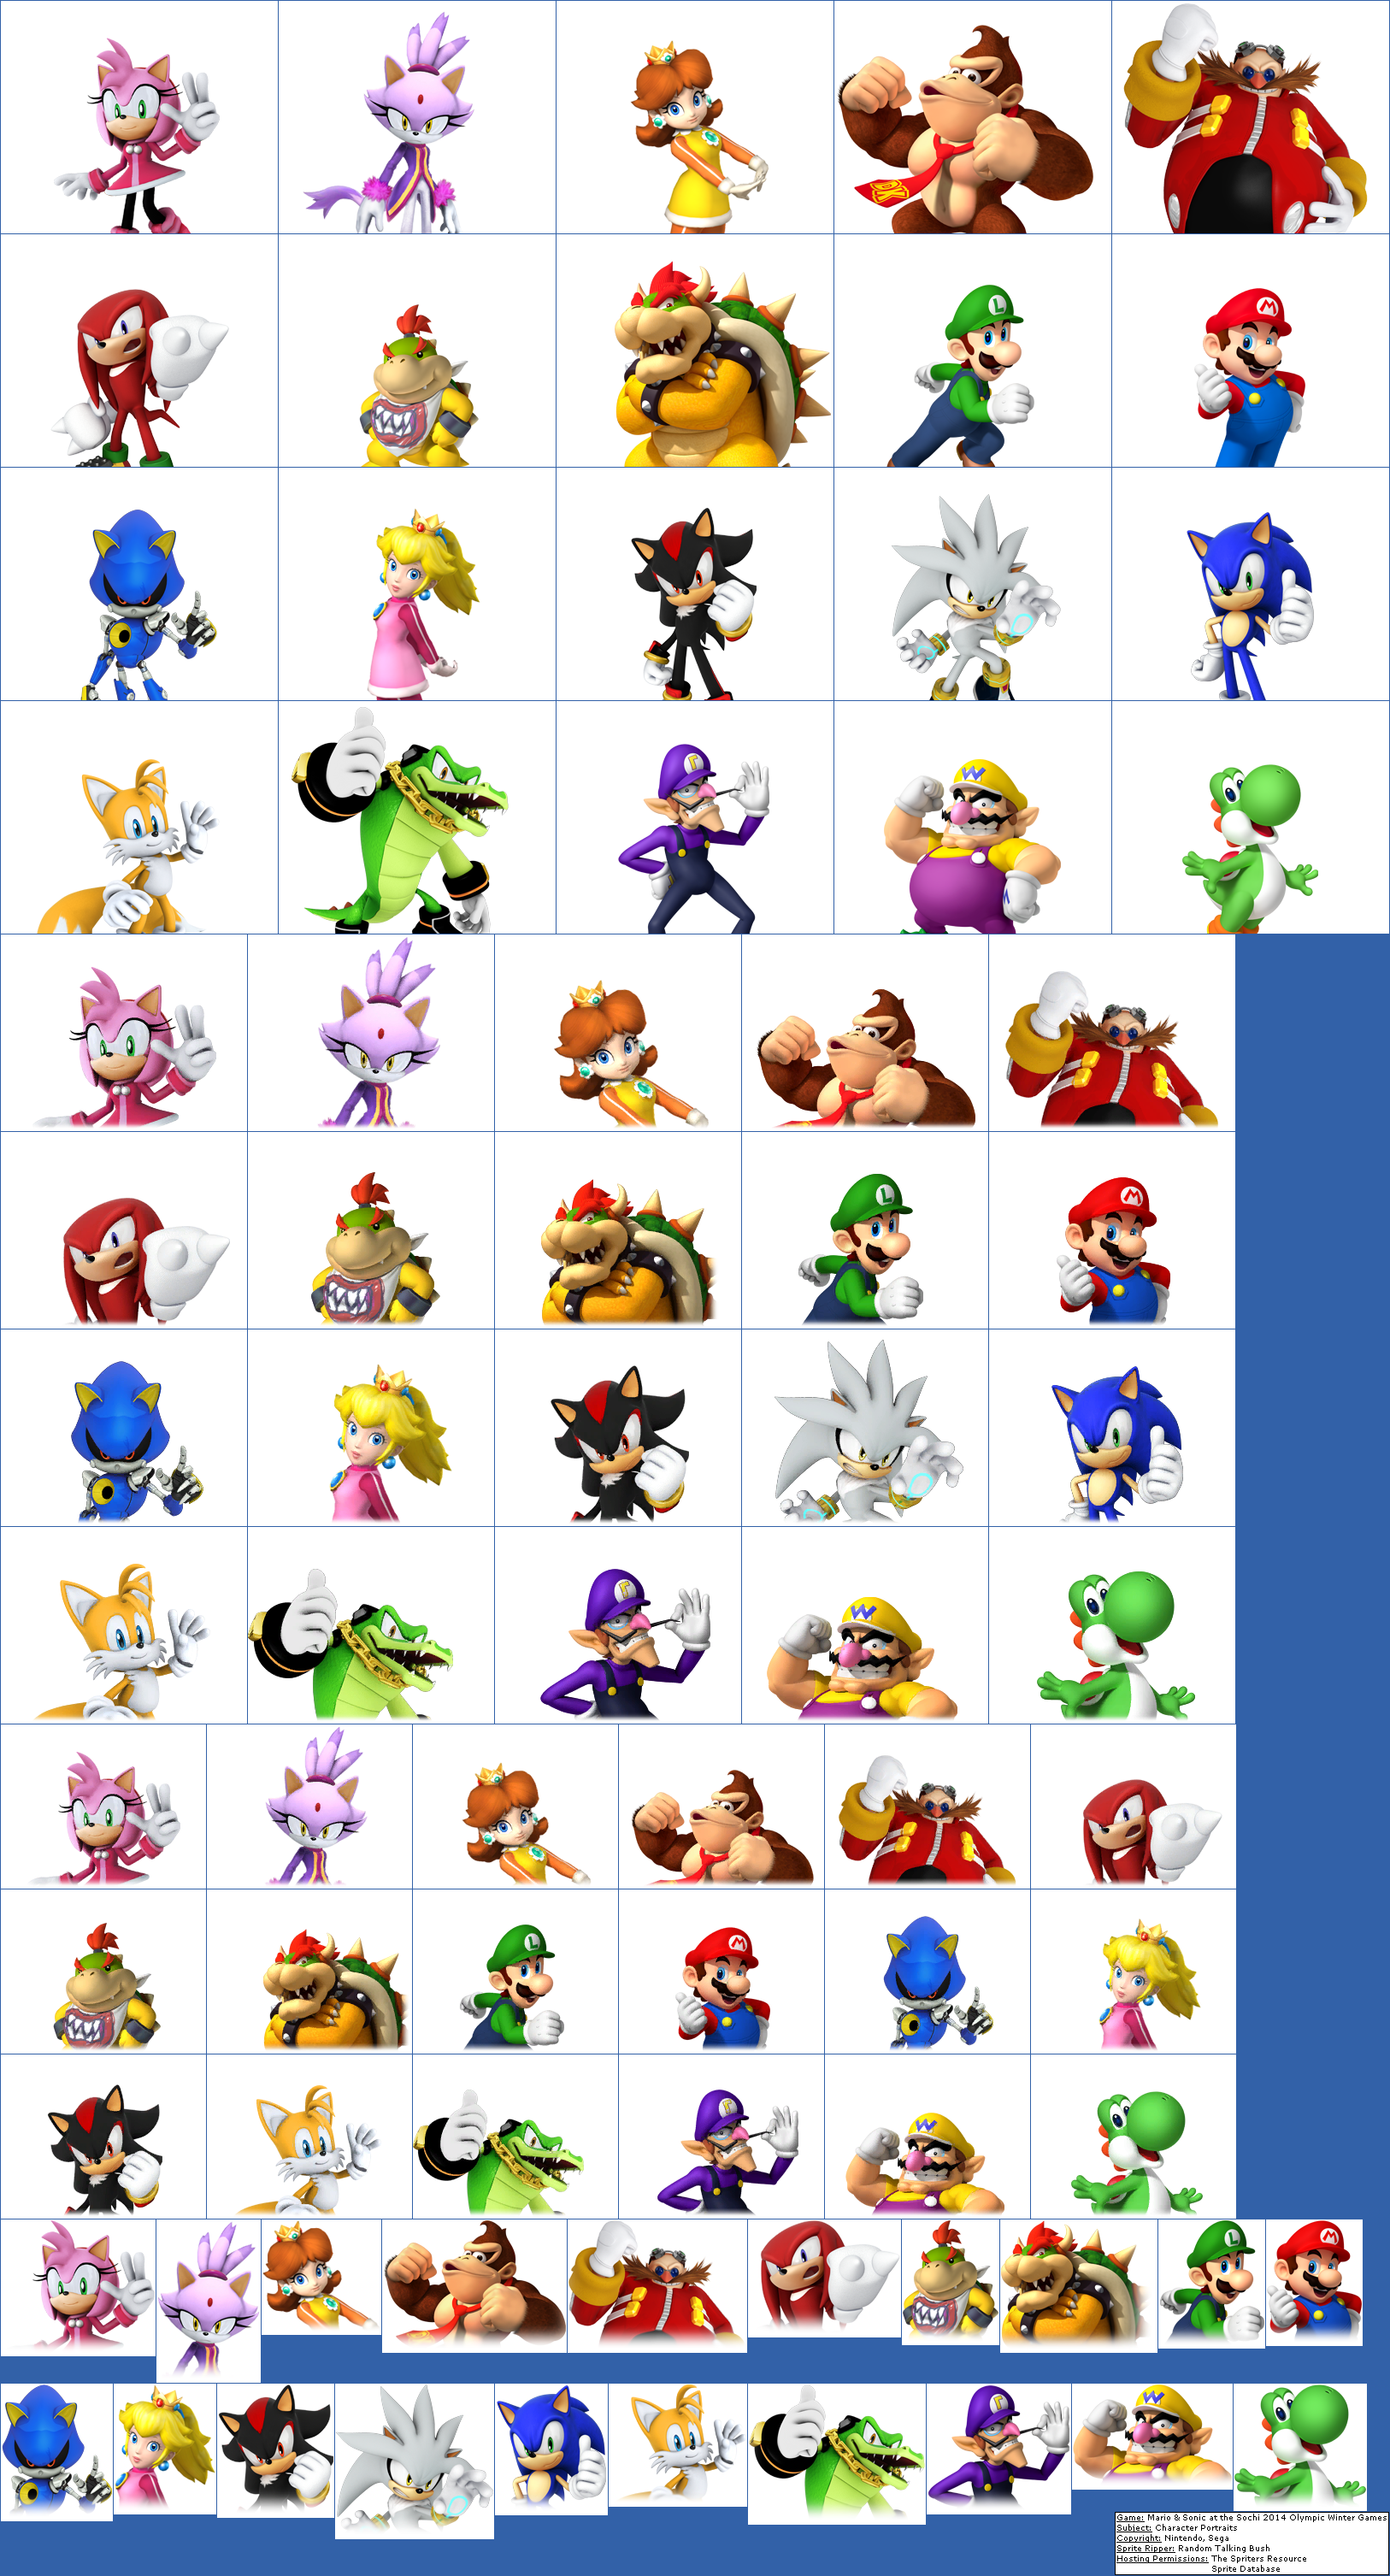 Mario & Sonic at the Sochi 2014 Olympic Winter Games - Character Portraits